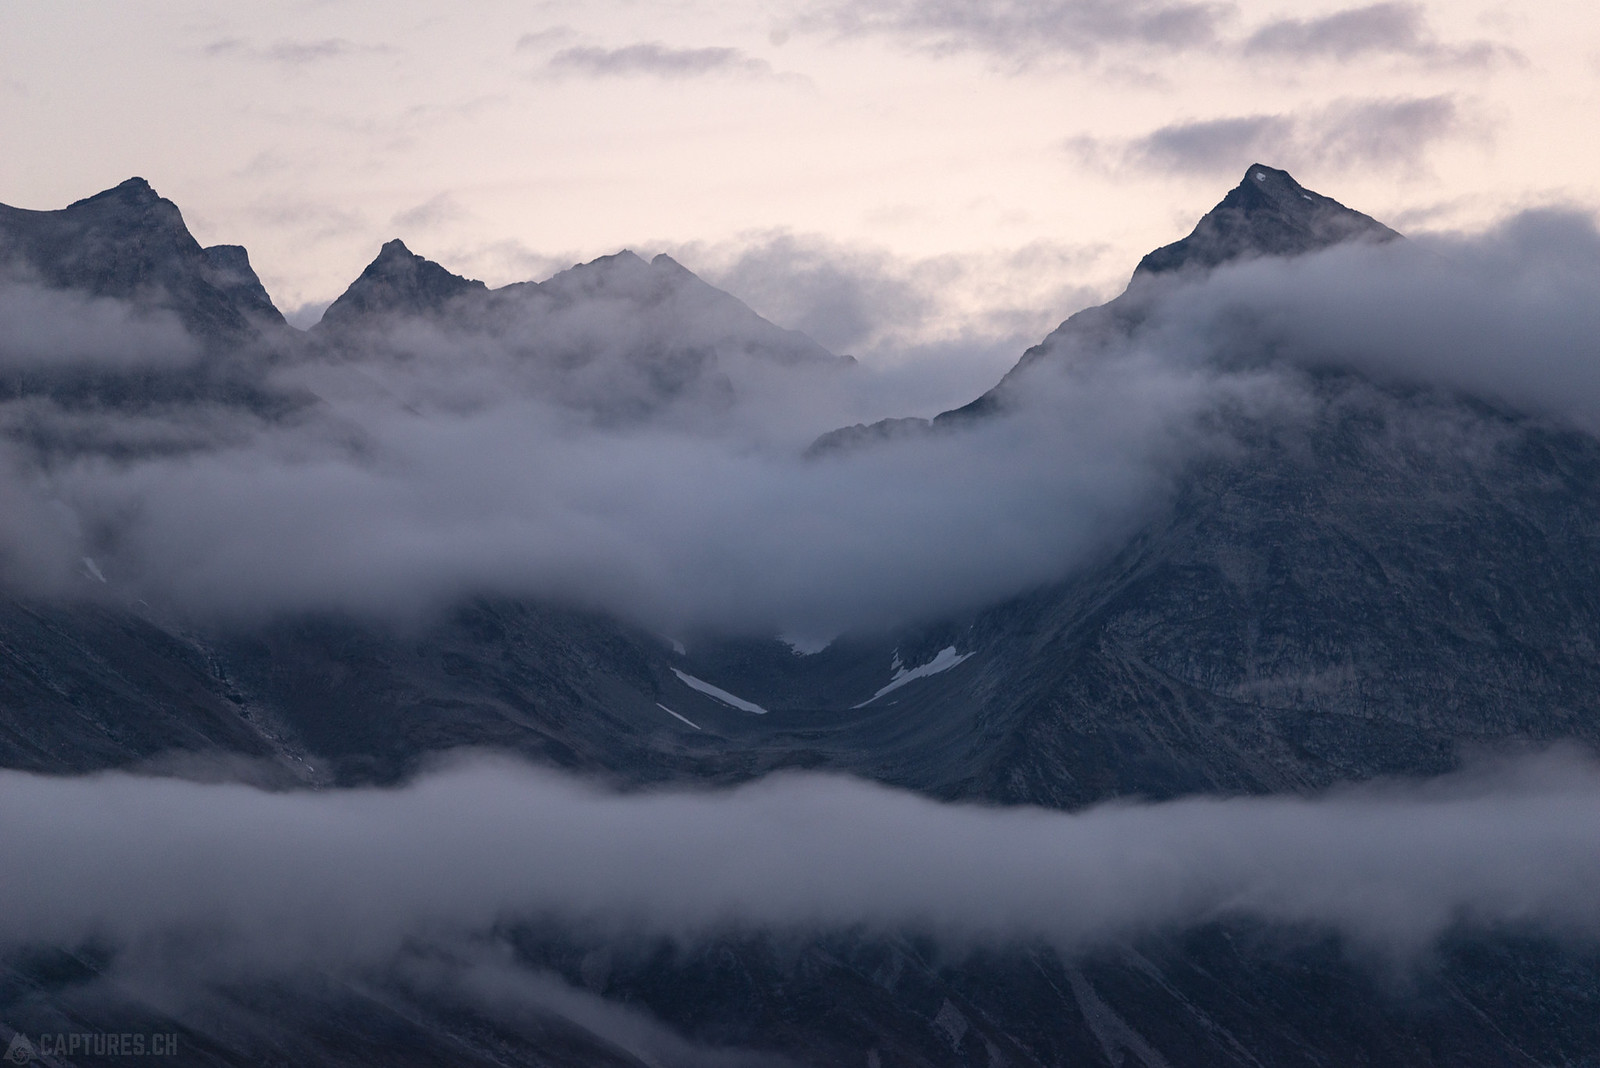 Clouds in the mountains - Tasermiut